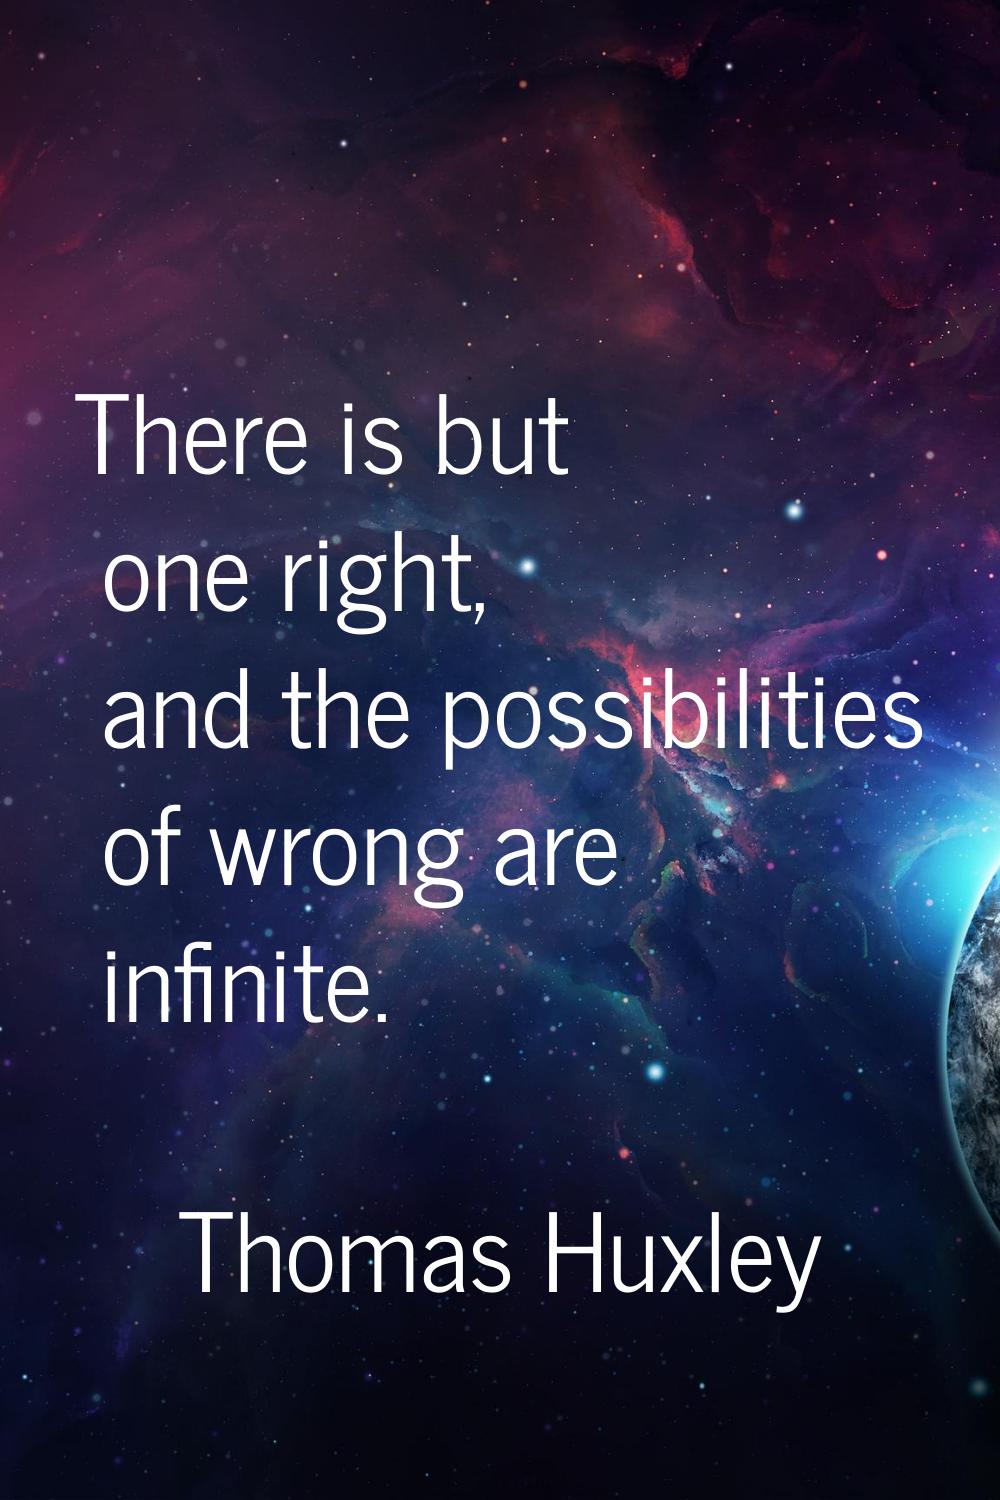 There is but one right, and the possibilities of wrong are infinite.